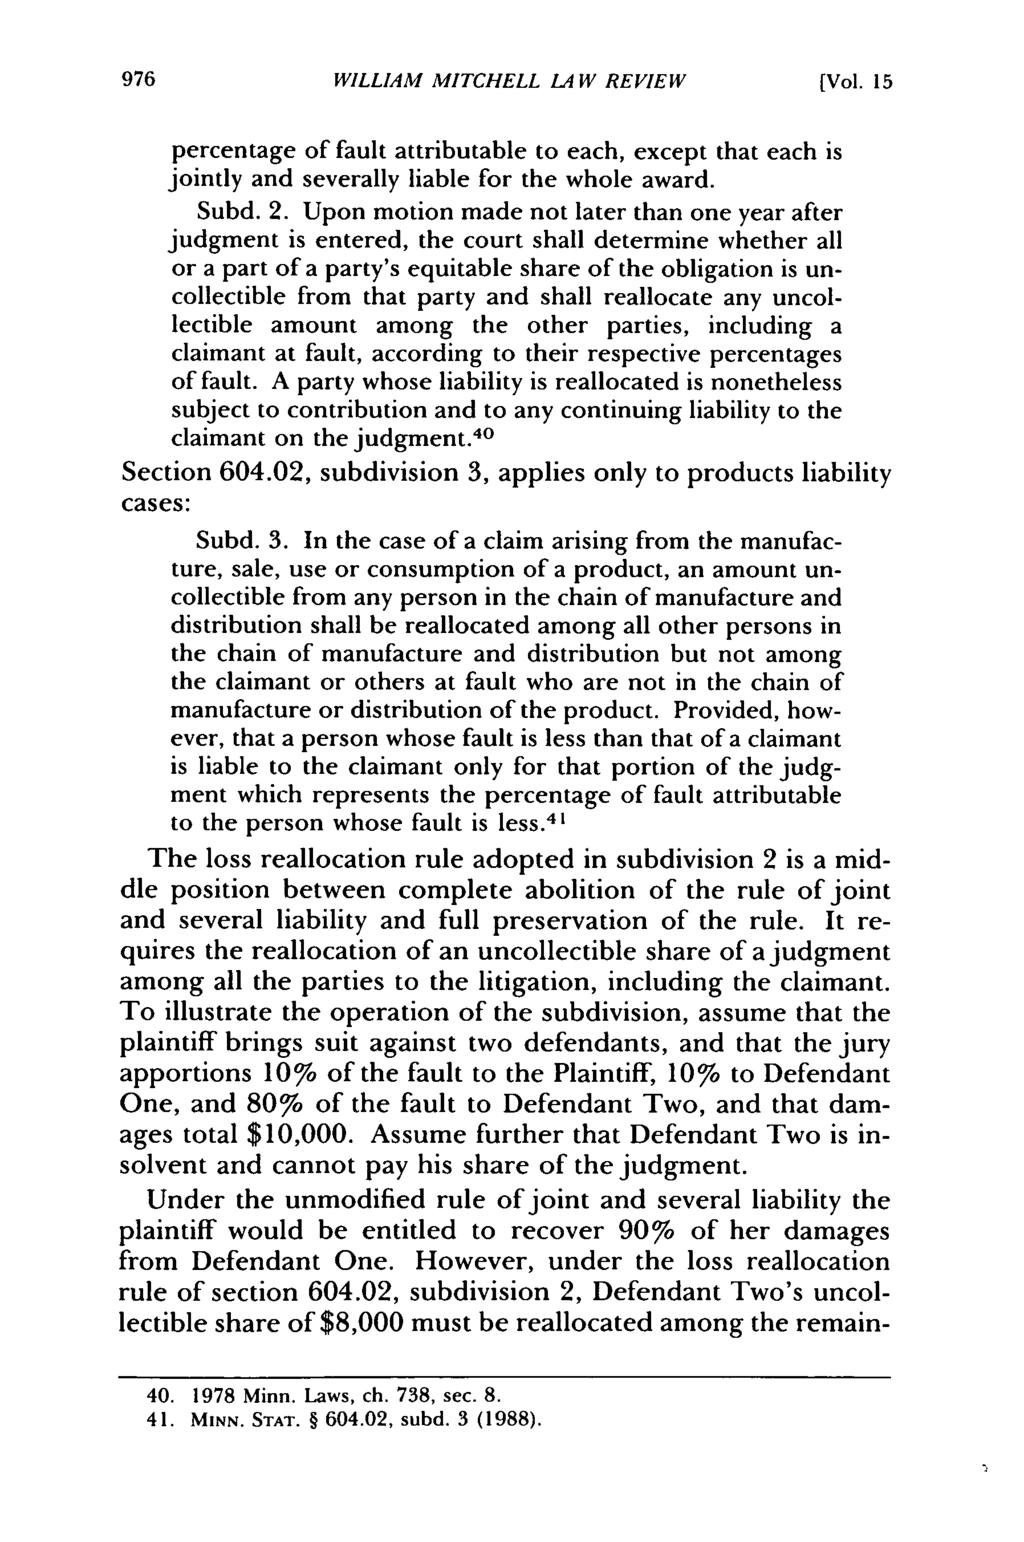 William Mitchell Law Review, Vol. 15, Iss. 4 [1989], Art. 3 http://open.